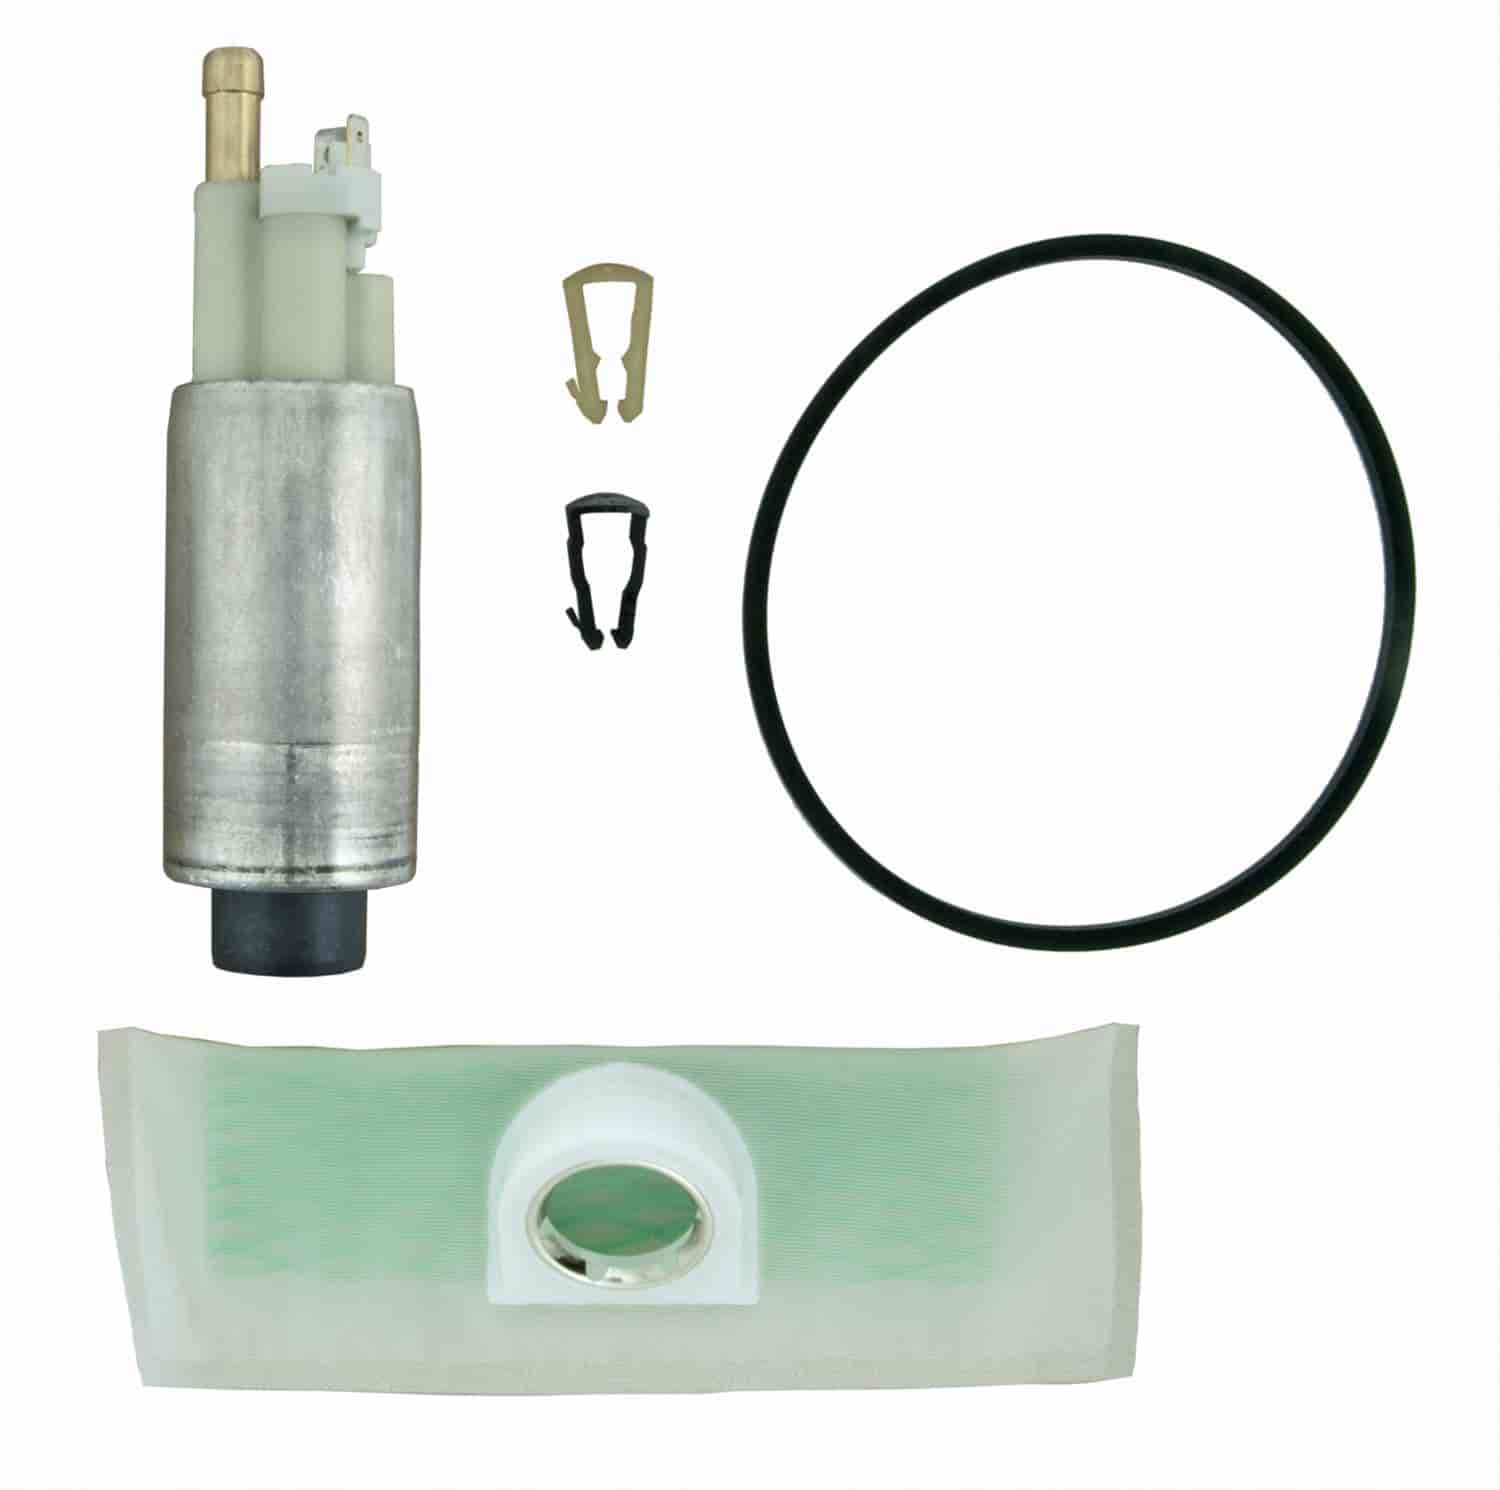 EFI In-Tank Electric Fuel Pump And Strainer Set for 1986-1992 Lincoln Mark VII